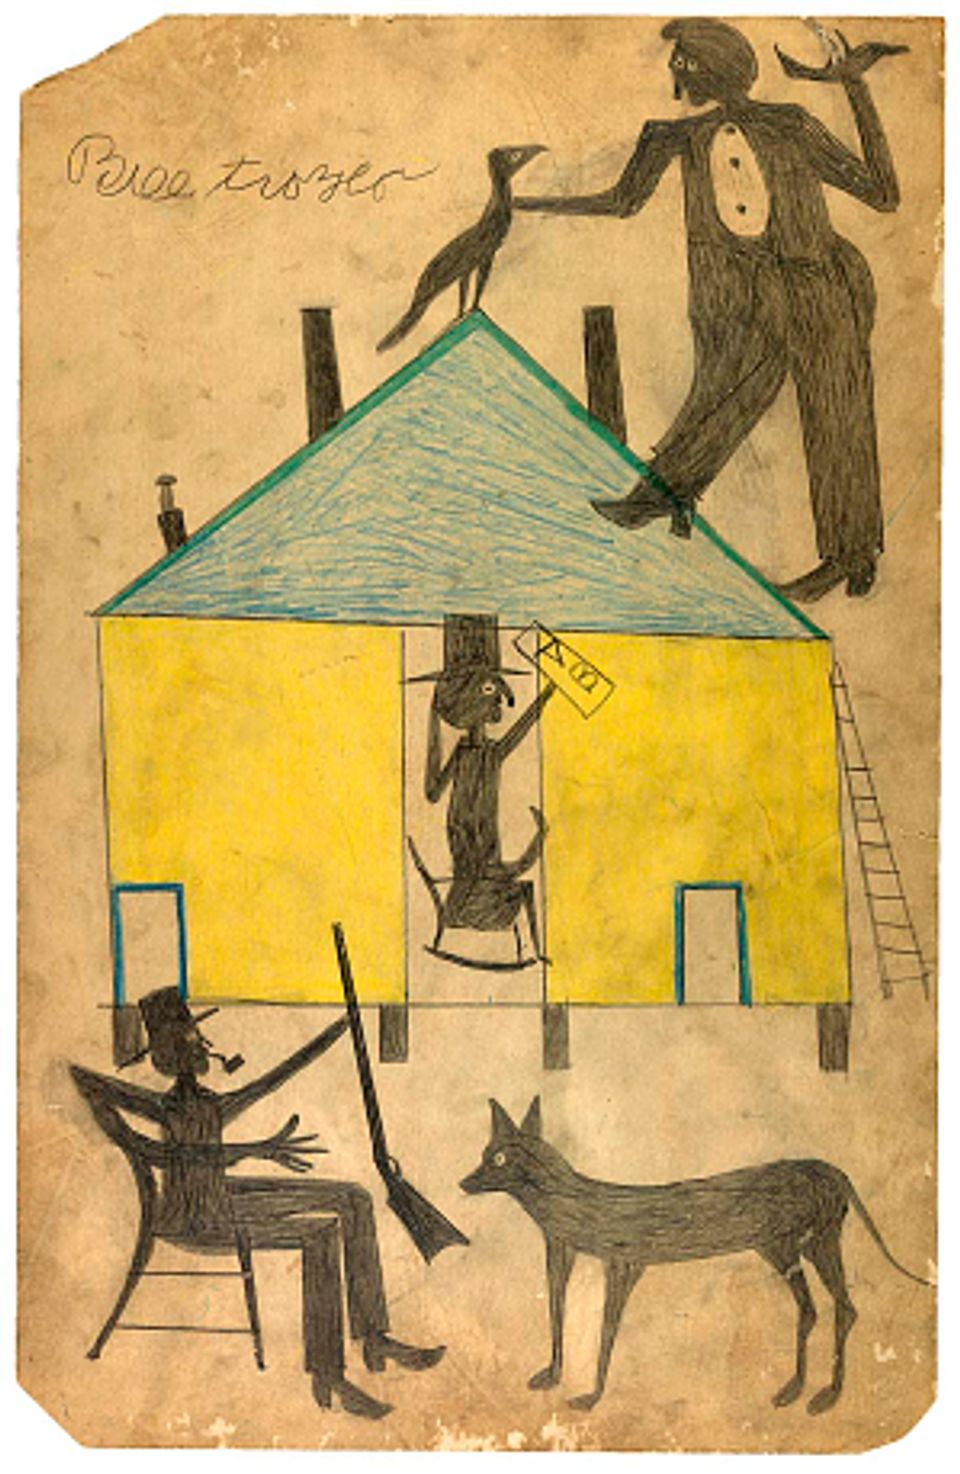 This is an image of an artwork by Bill Traylor that has a yellow house with someone standing on the roof and a dog below